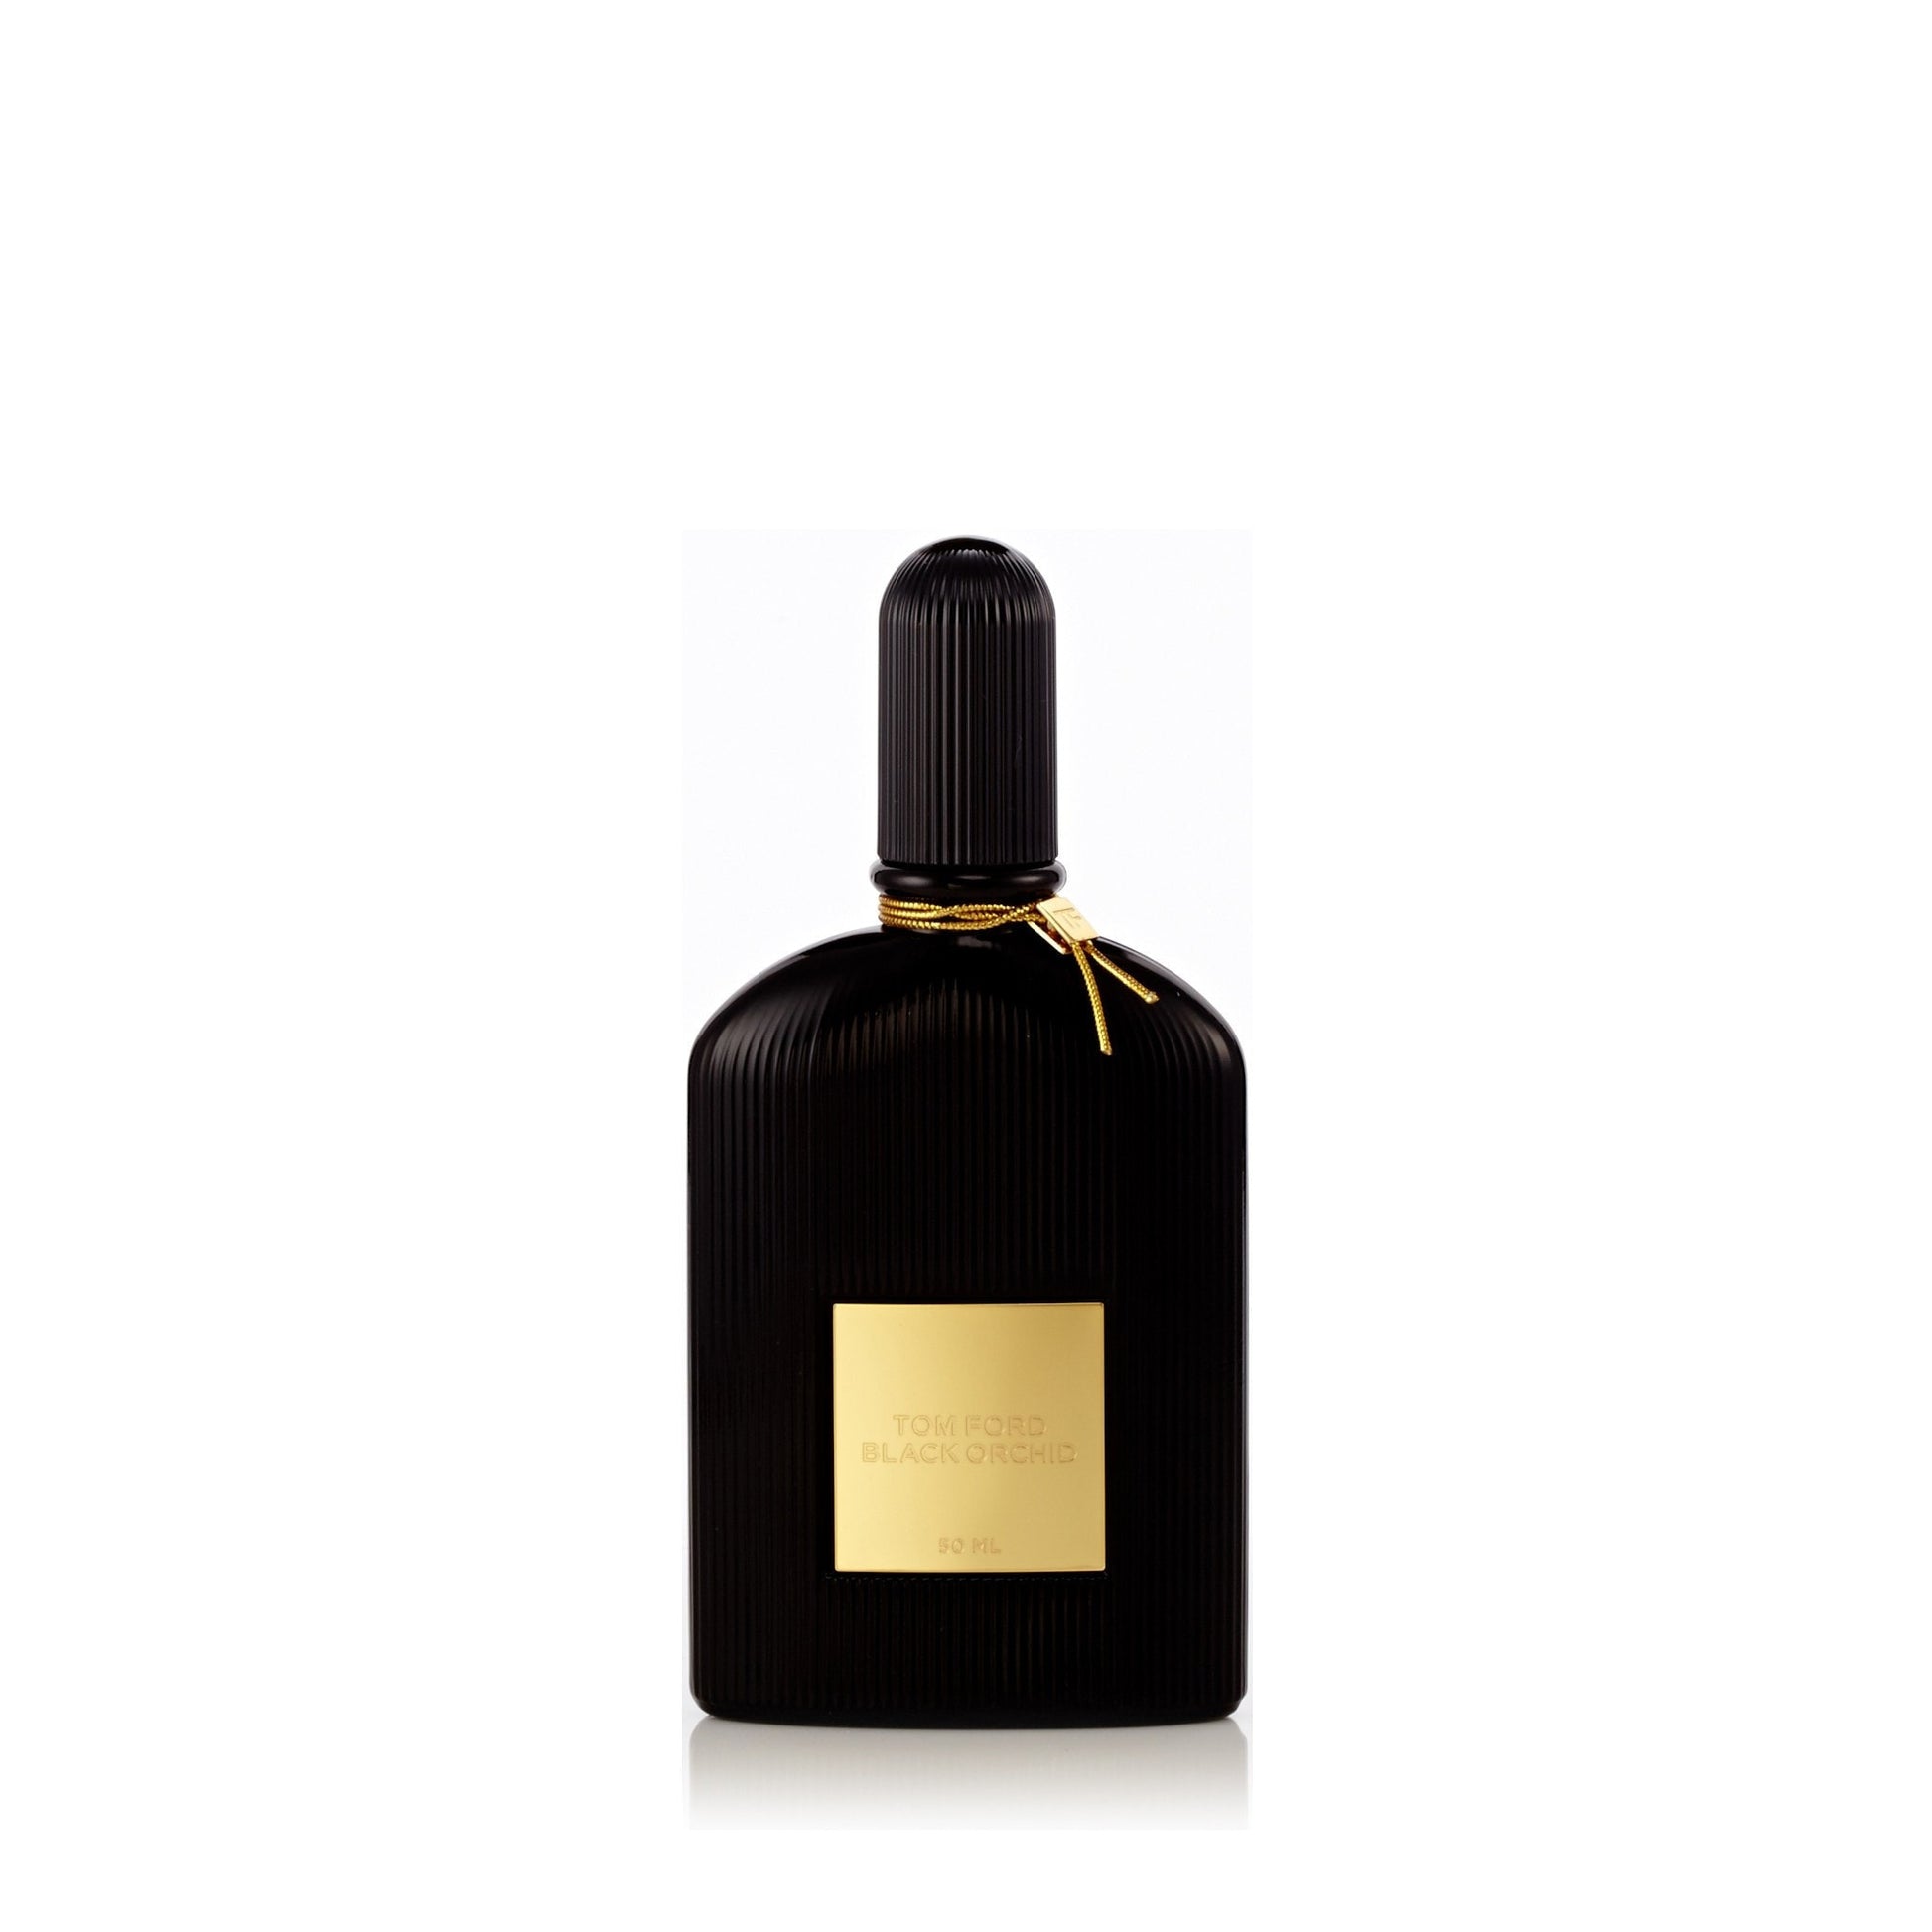 Black Orchid Eau de Parfum Spray for Women by Tom Ford 1.7 oz. Click to open in modal